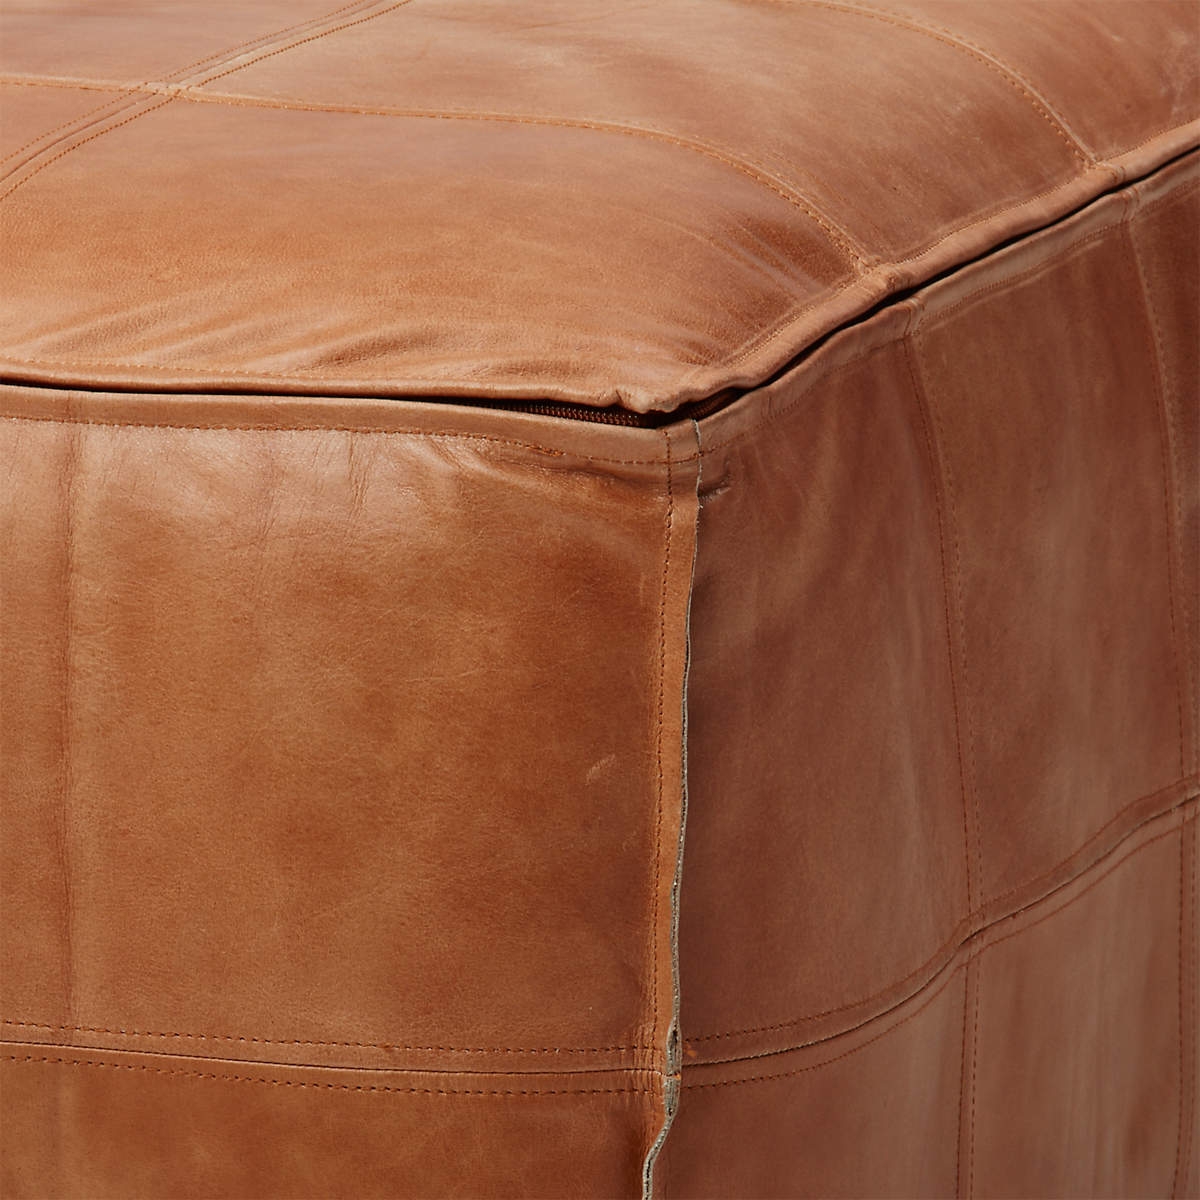 Large Brown Leather Ottoman Pouf - Image 2